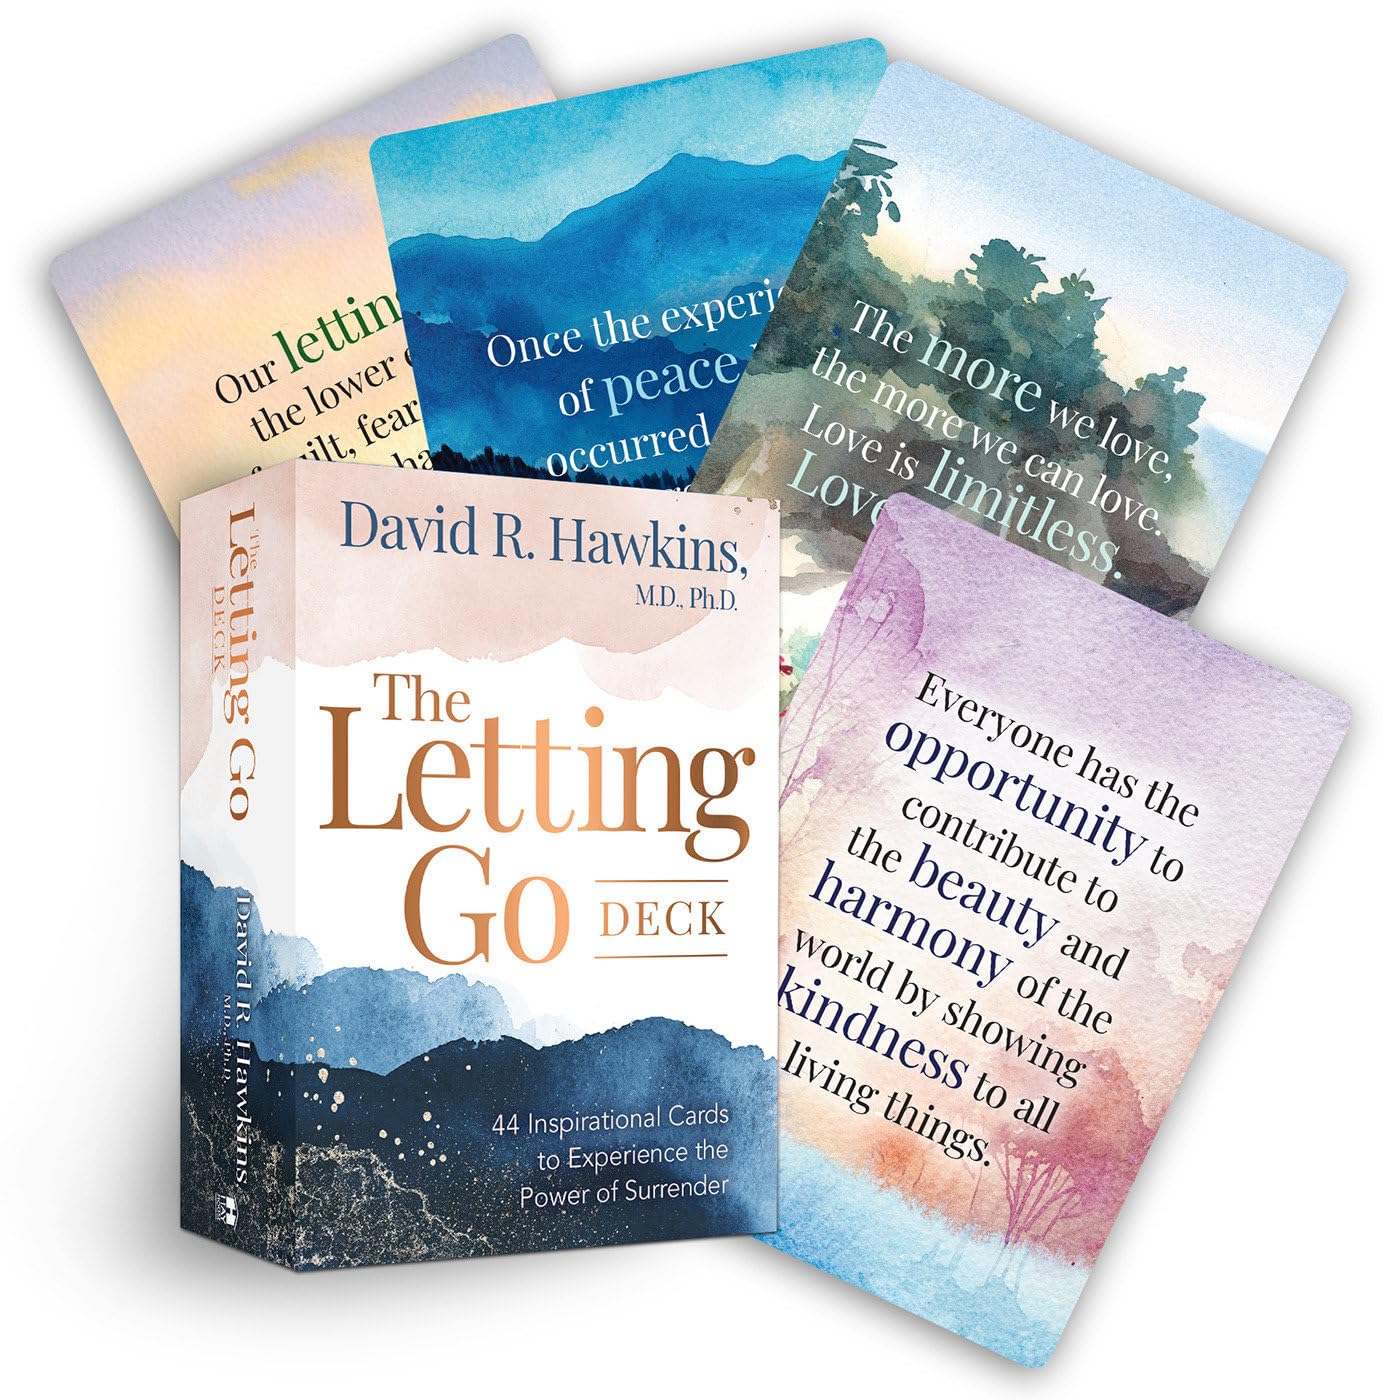 The Letting Go Deck - 44 Inspirational Cards to Experience the Power of Surrender